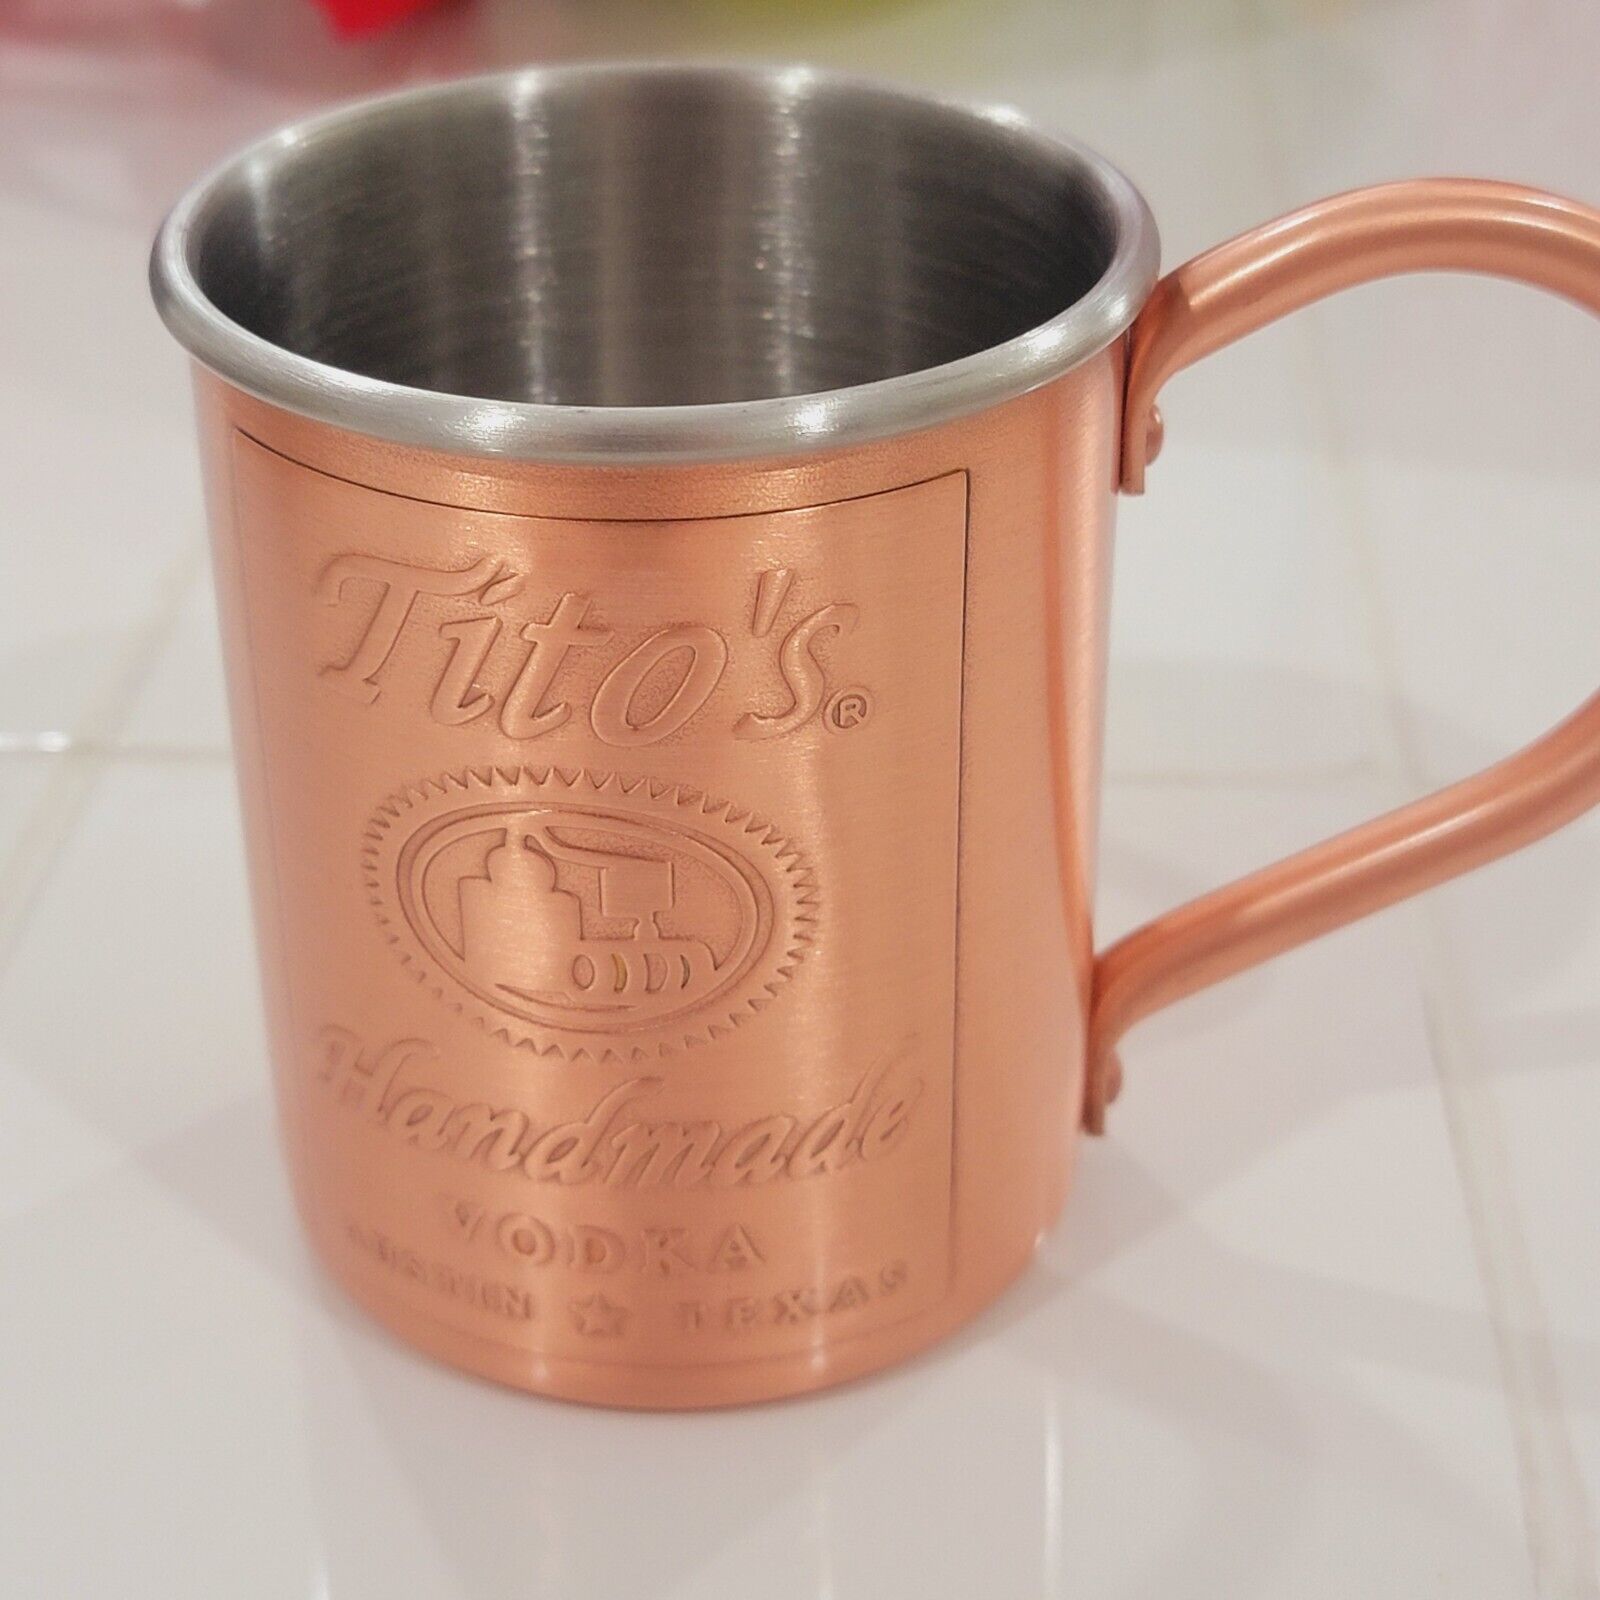 Tito\'s Handmade Vodka Copper Mugs Moscow Mule Cups Heavy Duty Engraved Set of 2